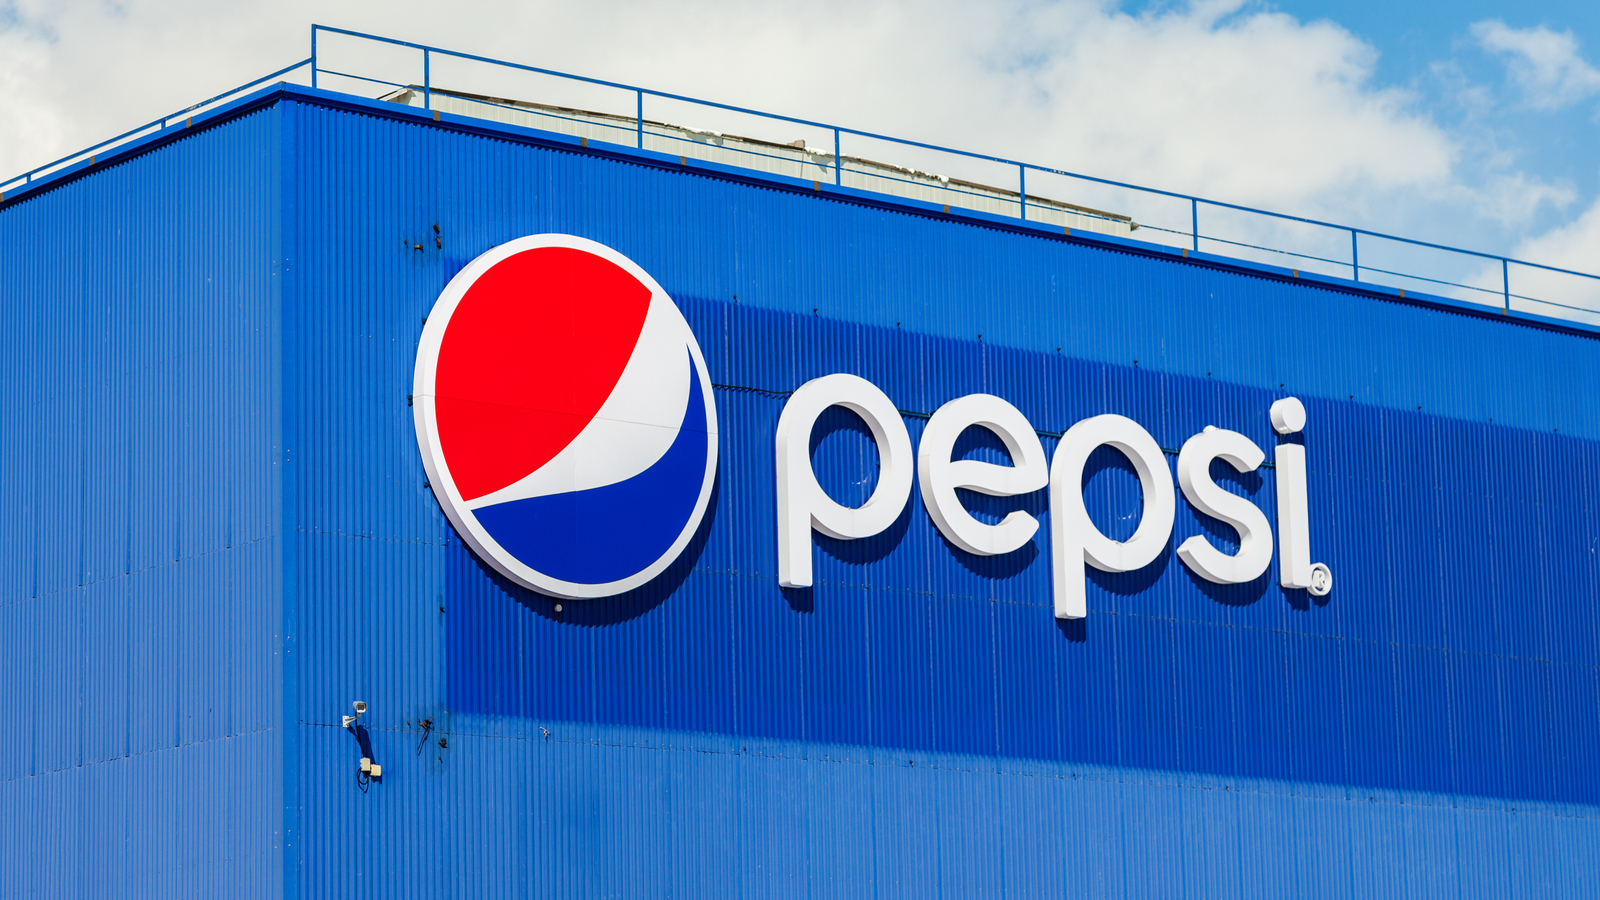 Logotype of PepsiCo (PEP stock) against the blue sky